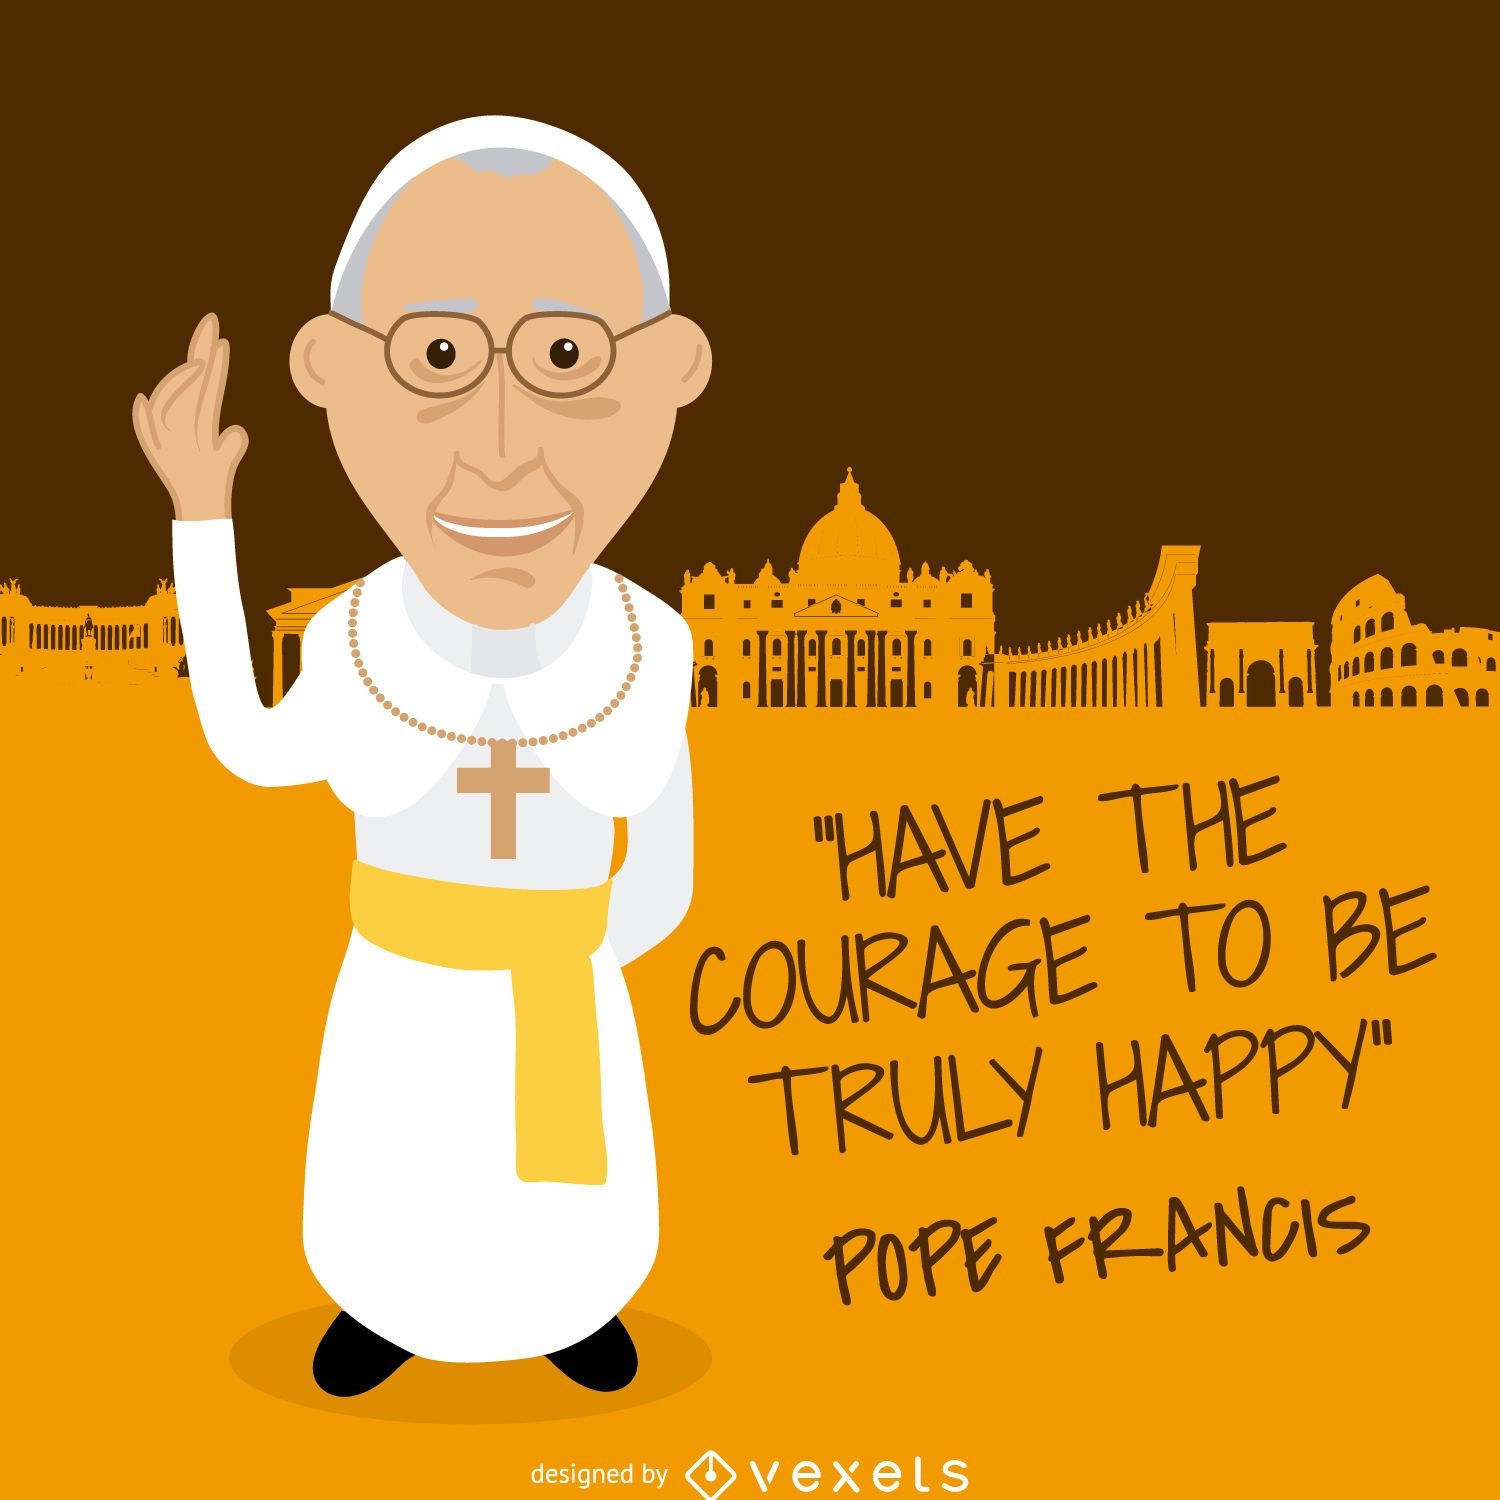 Pope Francis message drawing